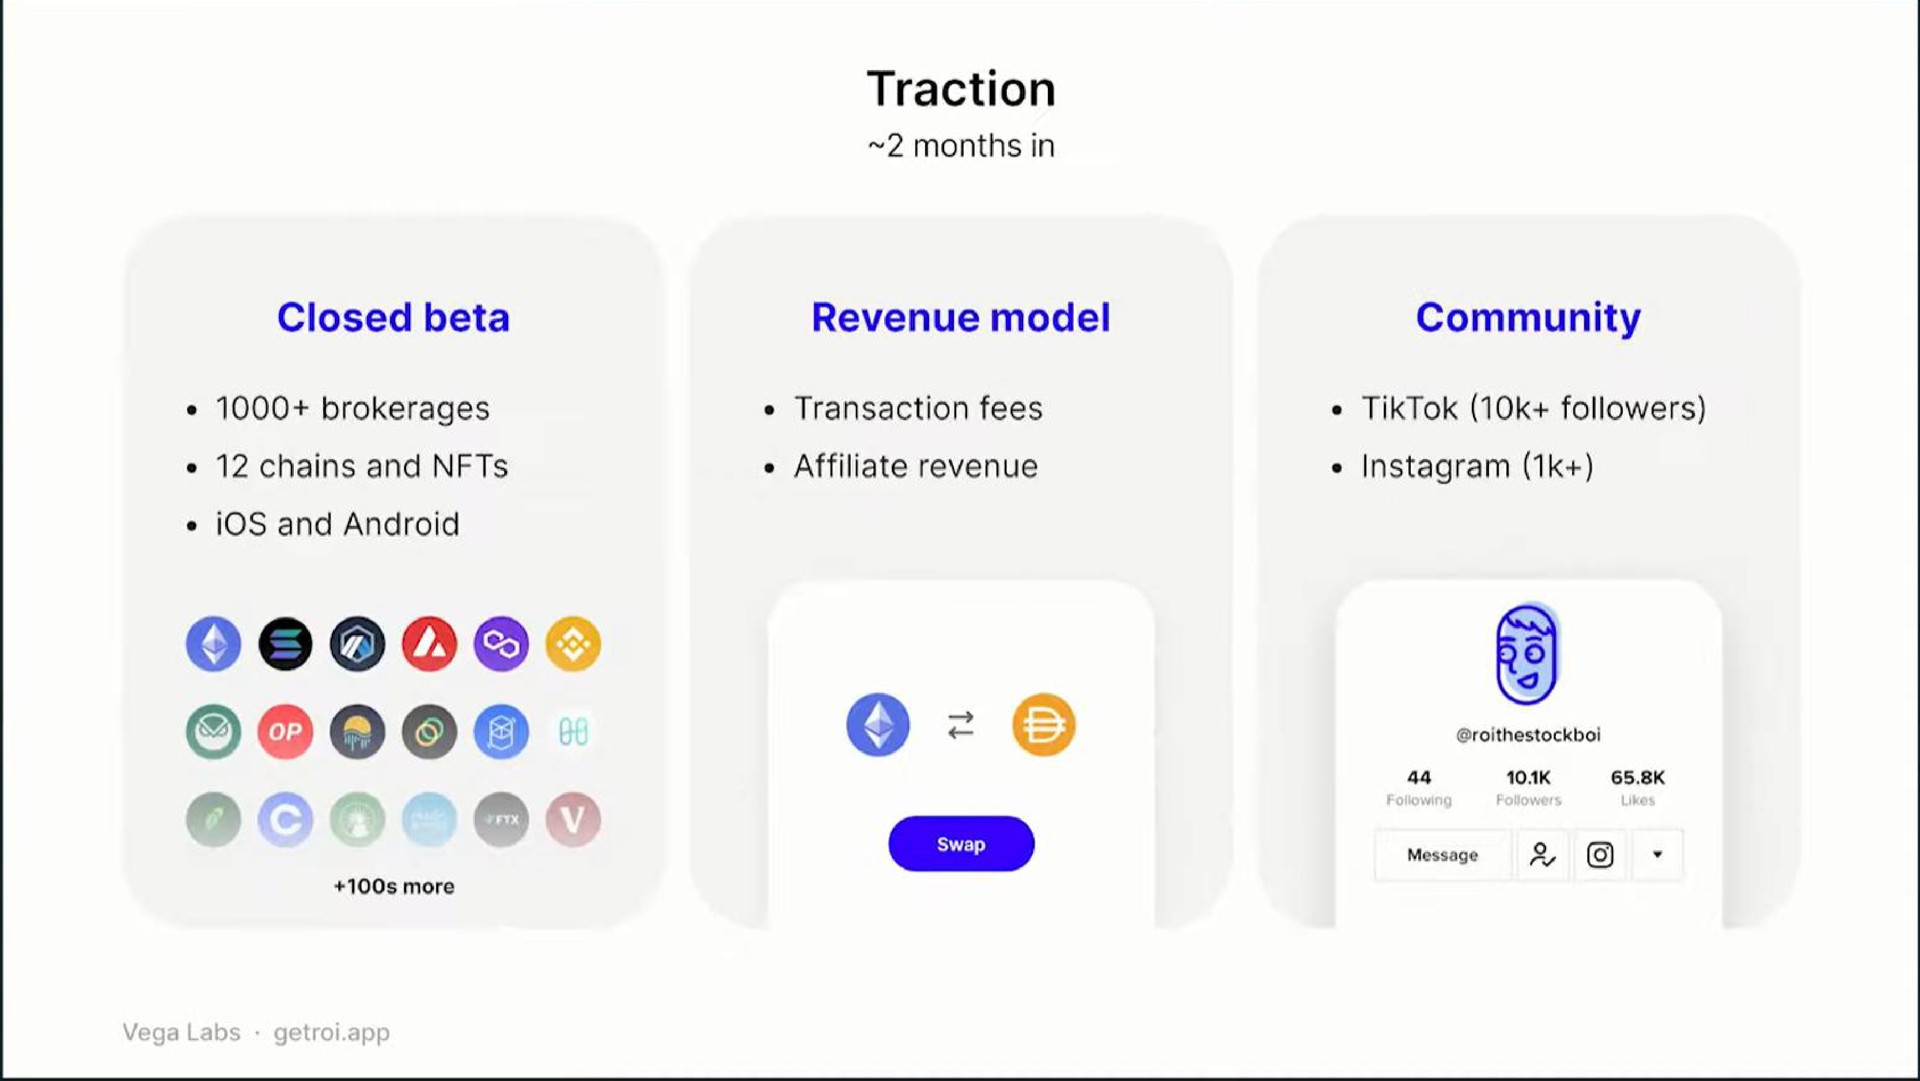 traction months in closed beta revenue model community brokerages chains and ios and android transaction fees affiliate revenue followers | Vega Labs